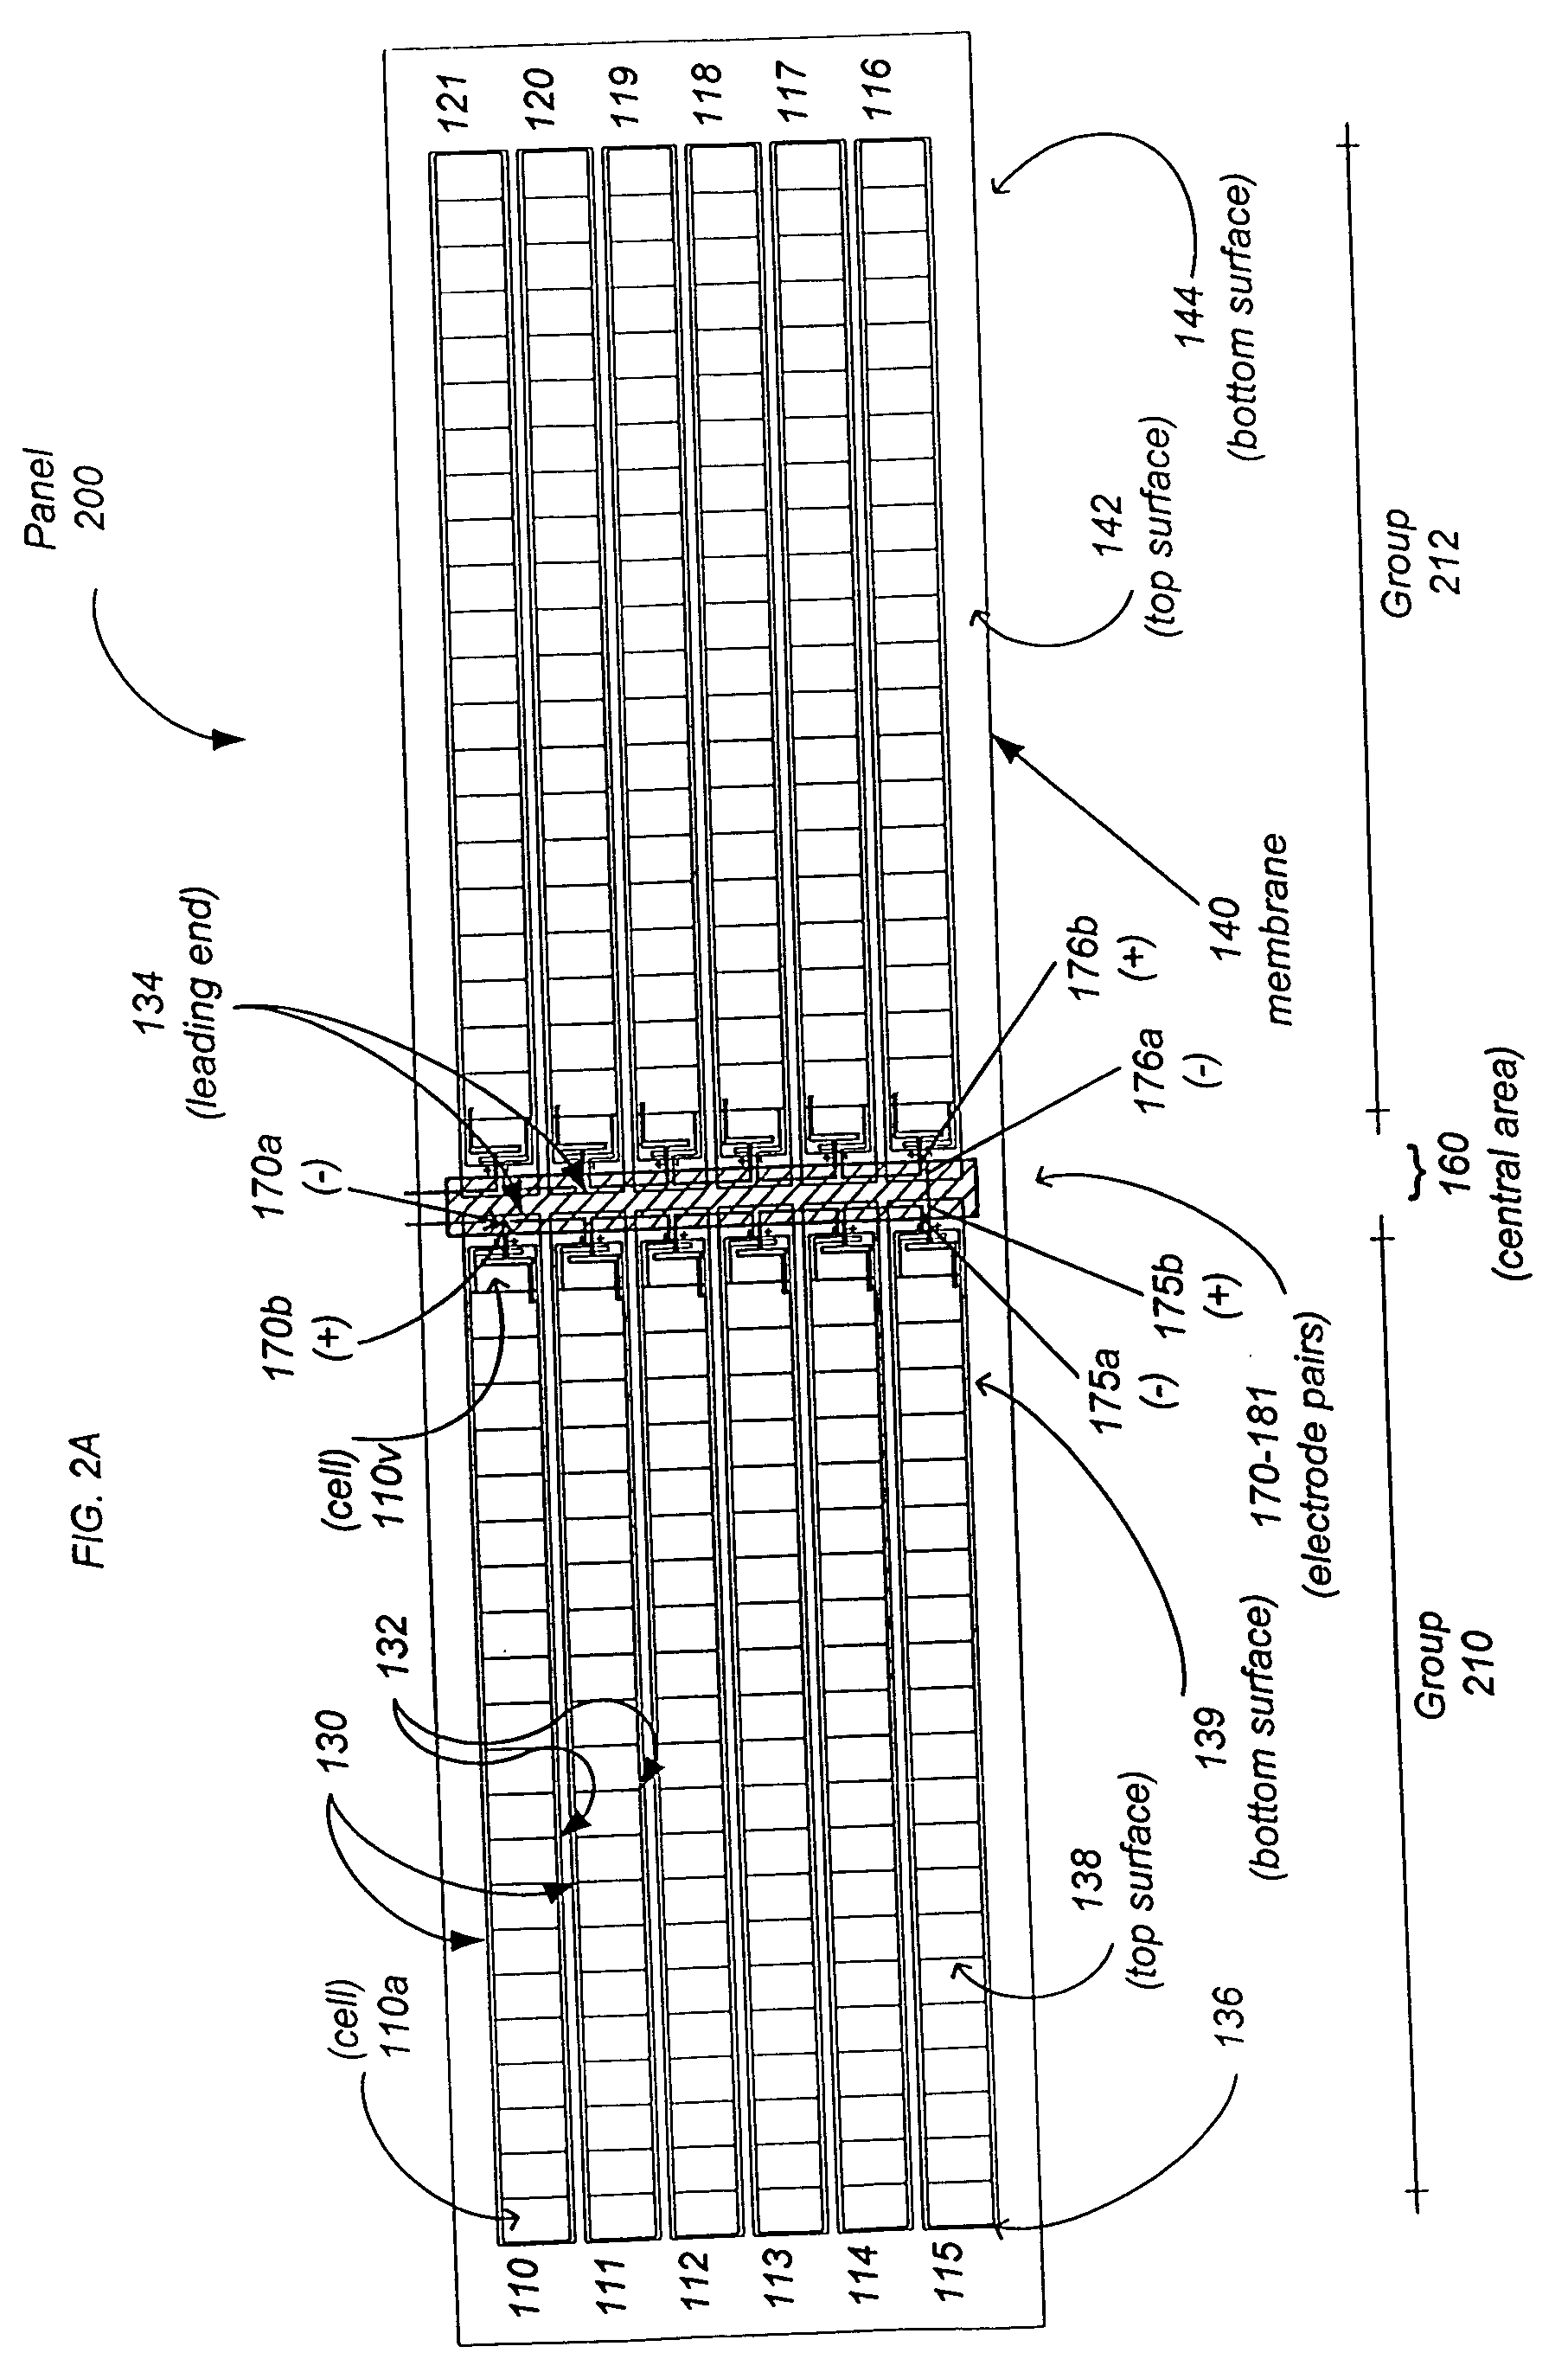 Integrated photovoltaic roofing system